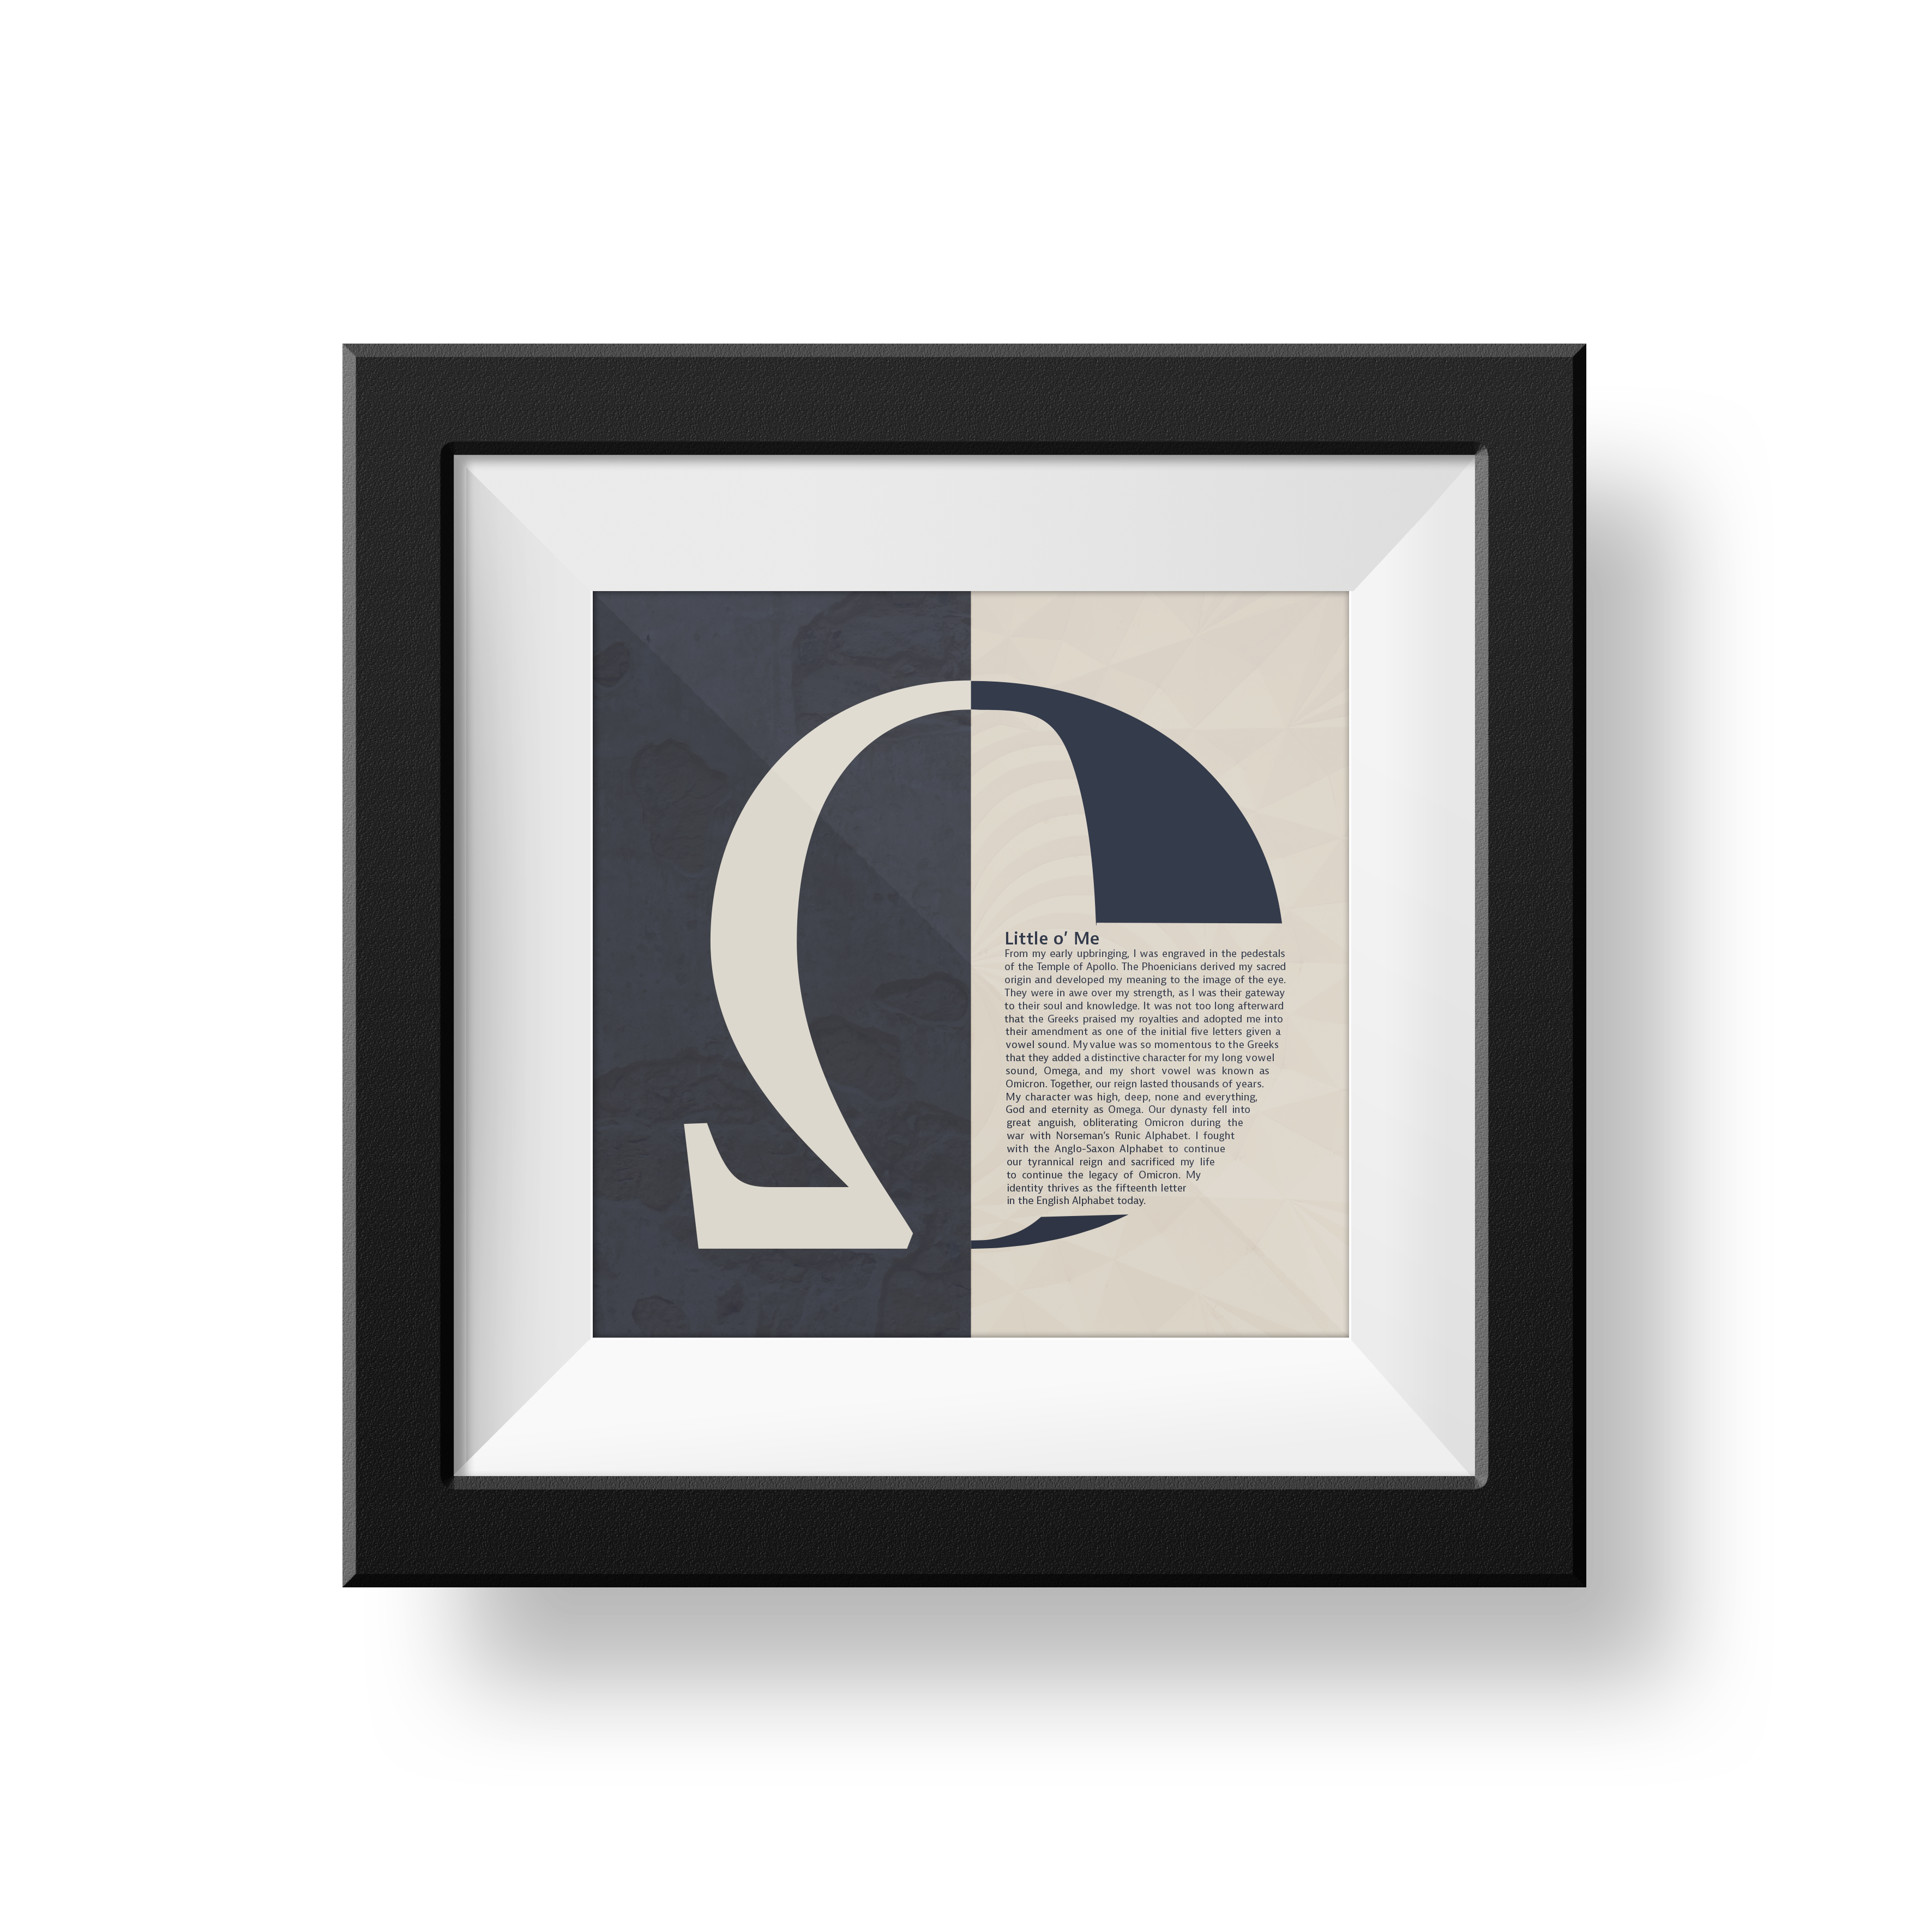 Framed artwork representing symbol of the letter o's history, half omicron and Omega.